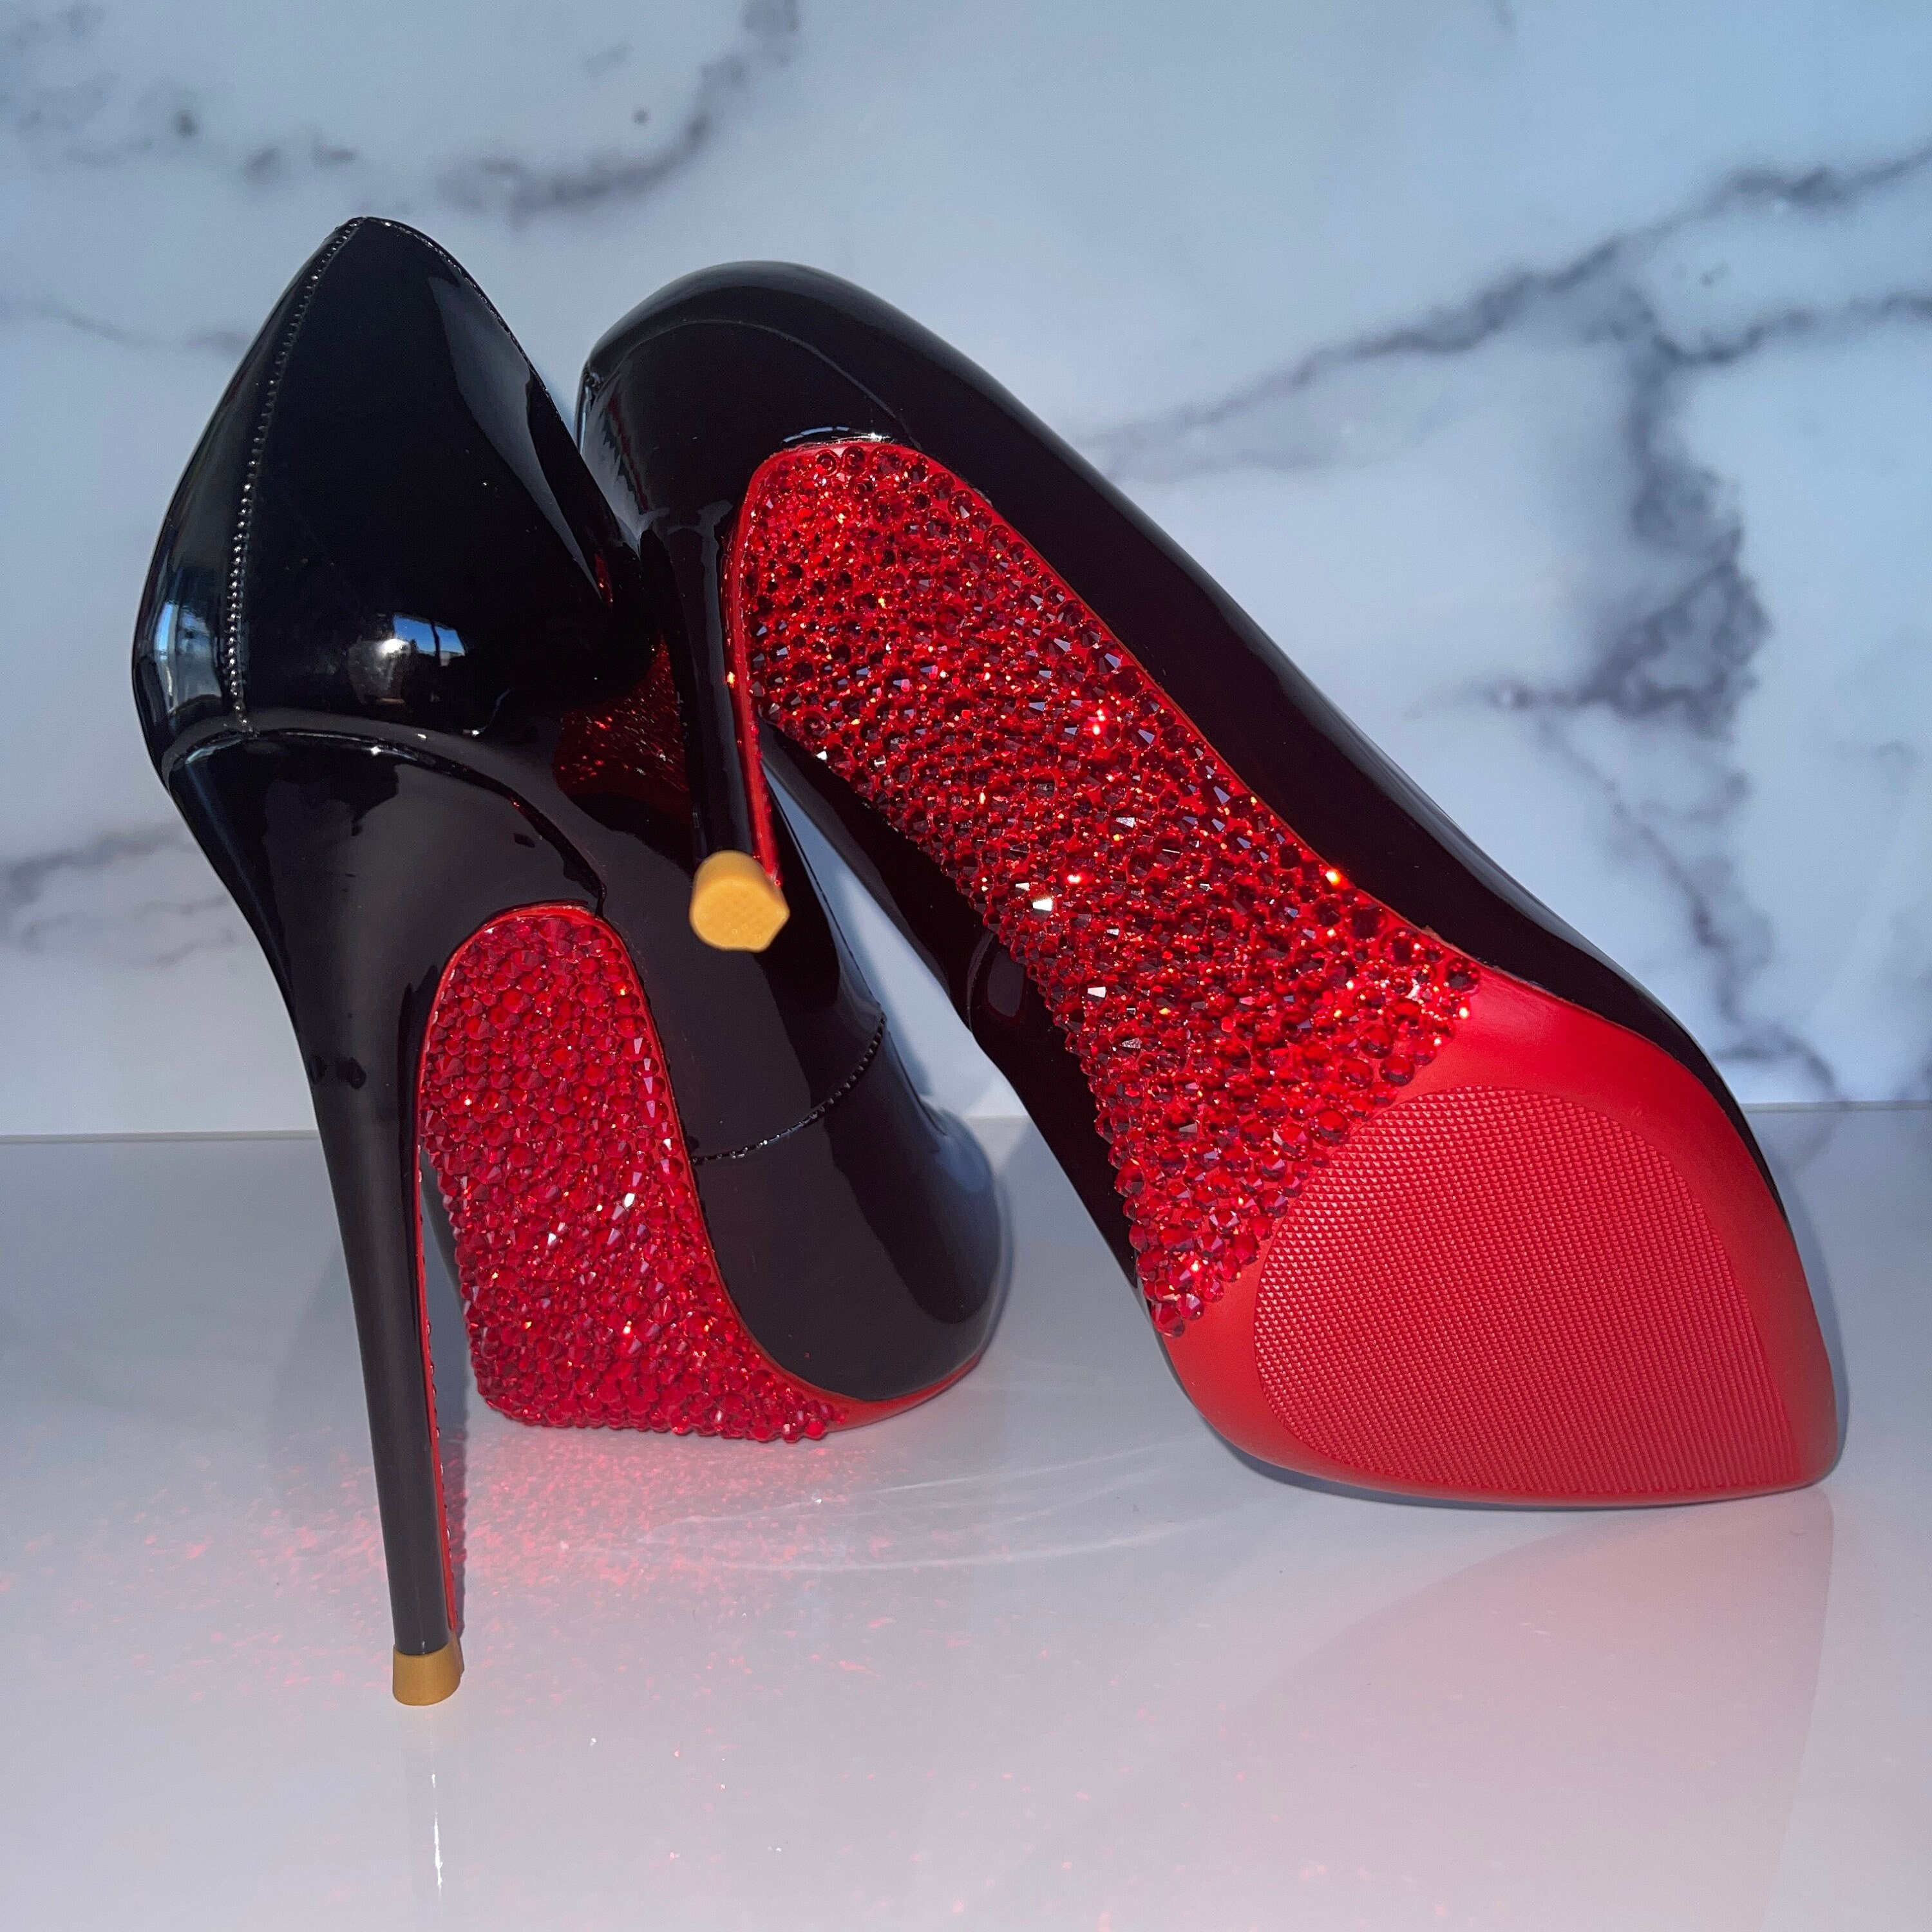 Crystal Red Bottoms Stiletto Pumps Formal Party Prom -  India